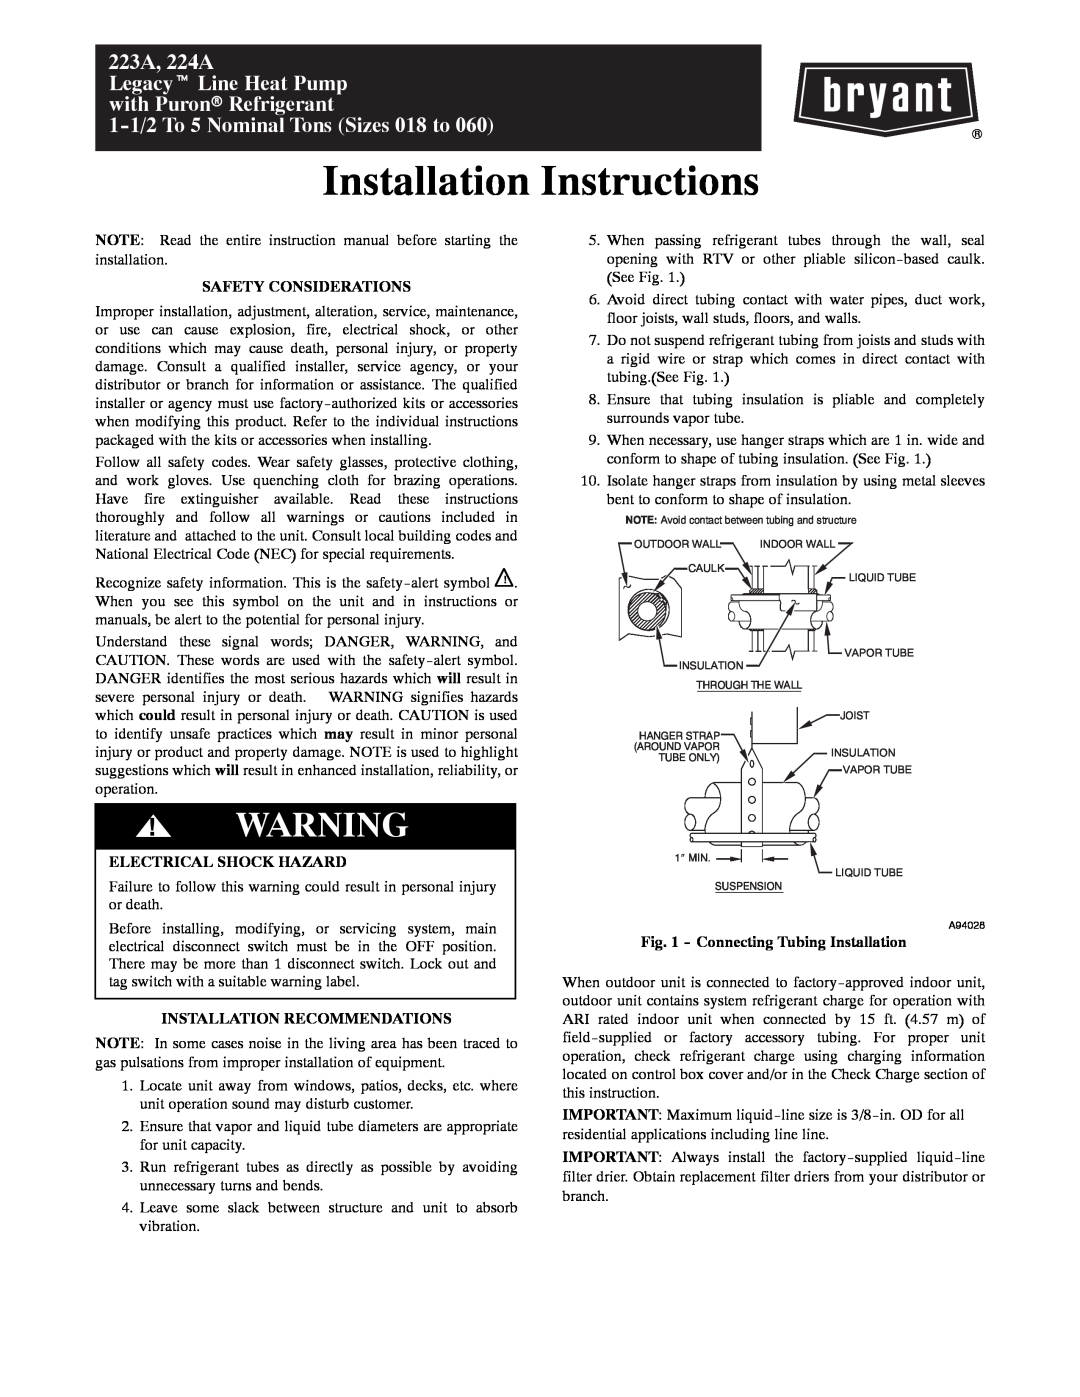 Bryant 224A, 223A installation instructions Safety Considerations, Electrical Shock Hazard, Installation Recommendations 